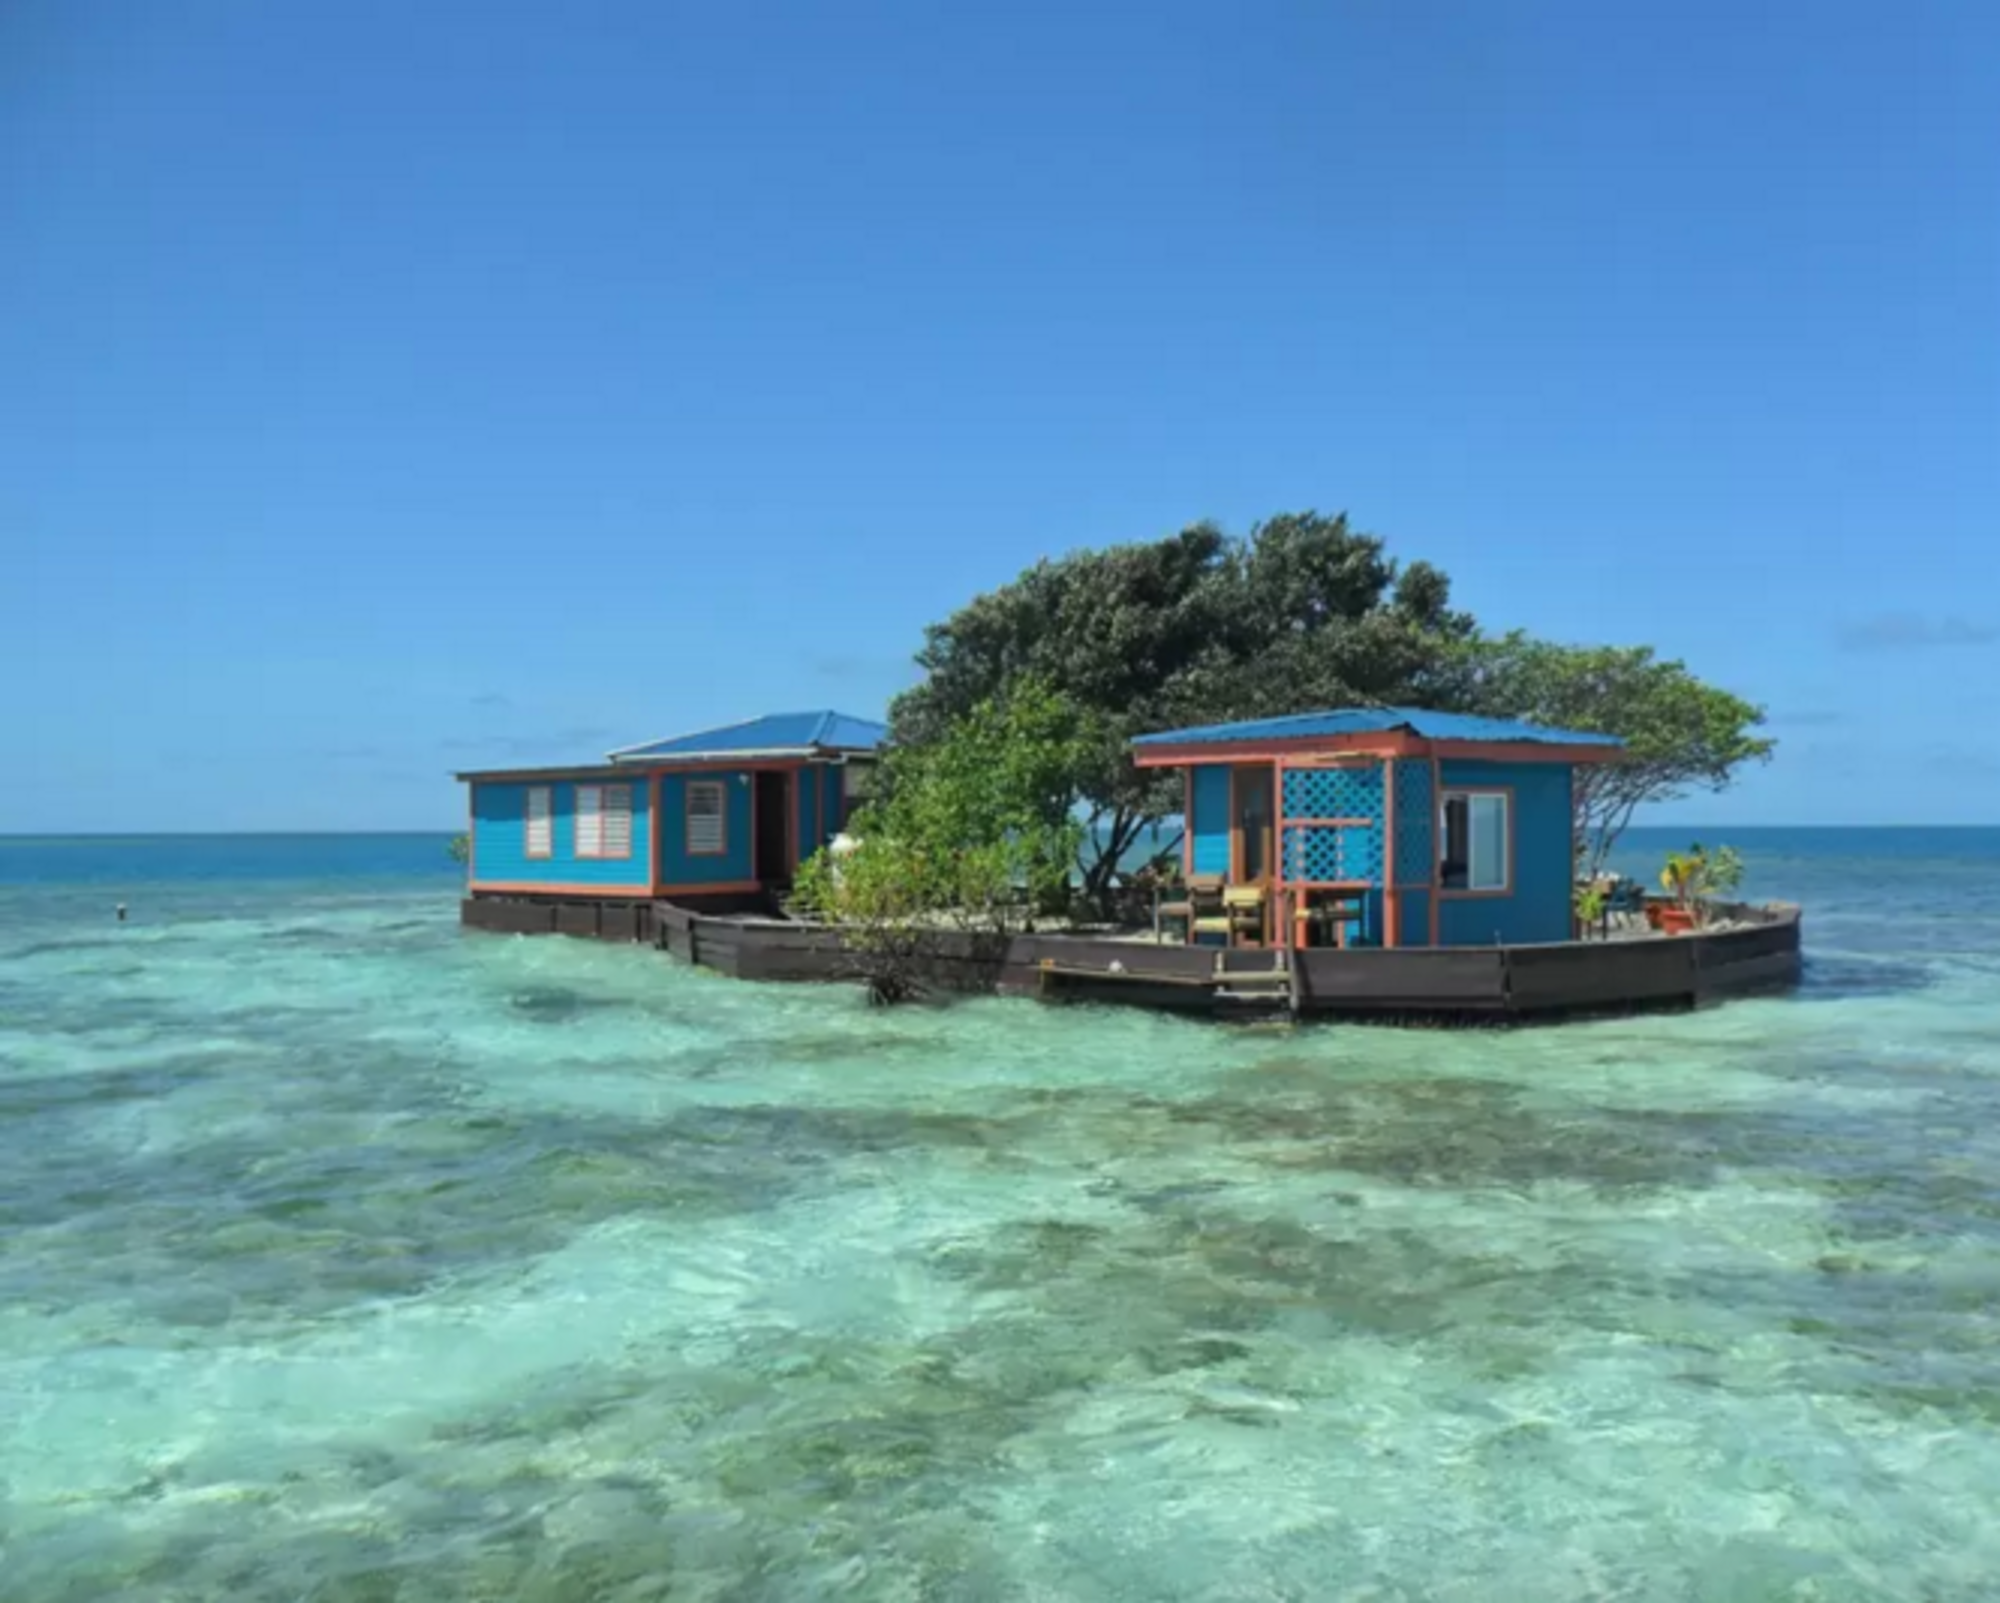 http://www.islands.com/private-islands-you-can-rent-on-airbnb-right-now?HgzRZgLd7Z0gJBhS.01